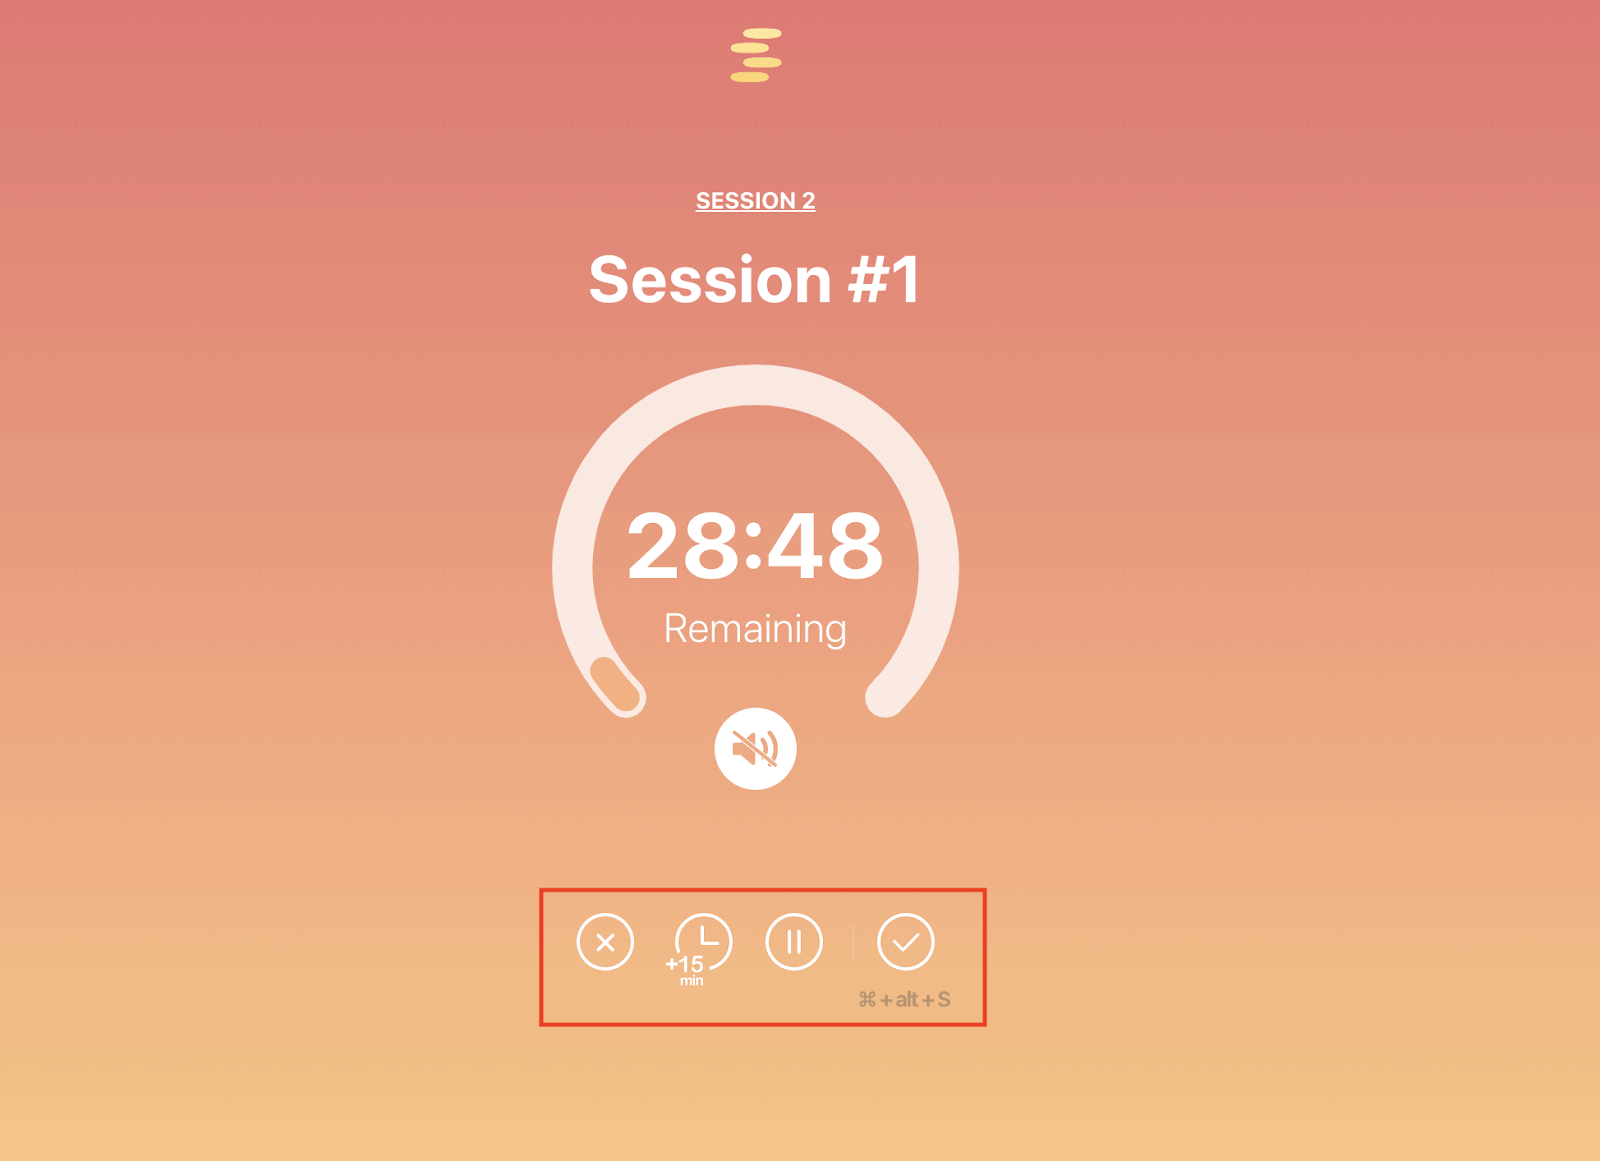 A user shared the session timings after using Serene app